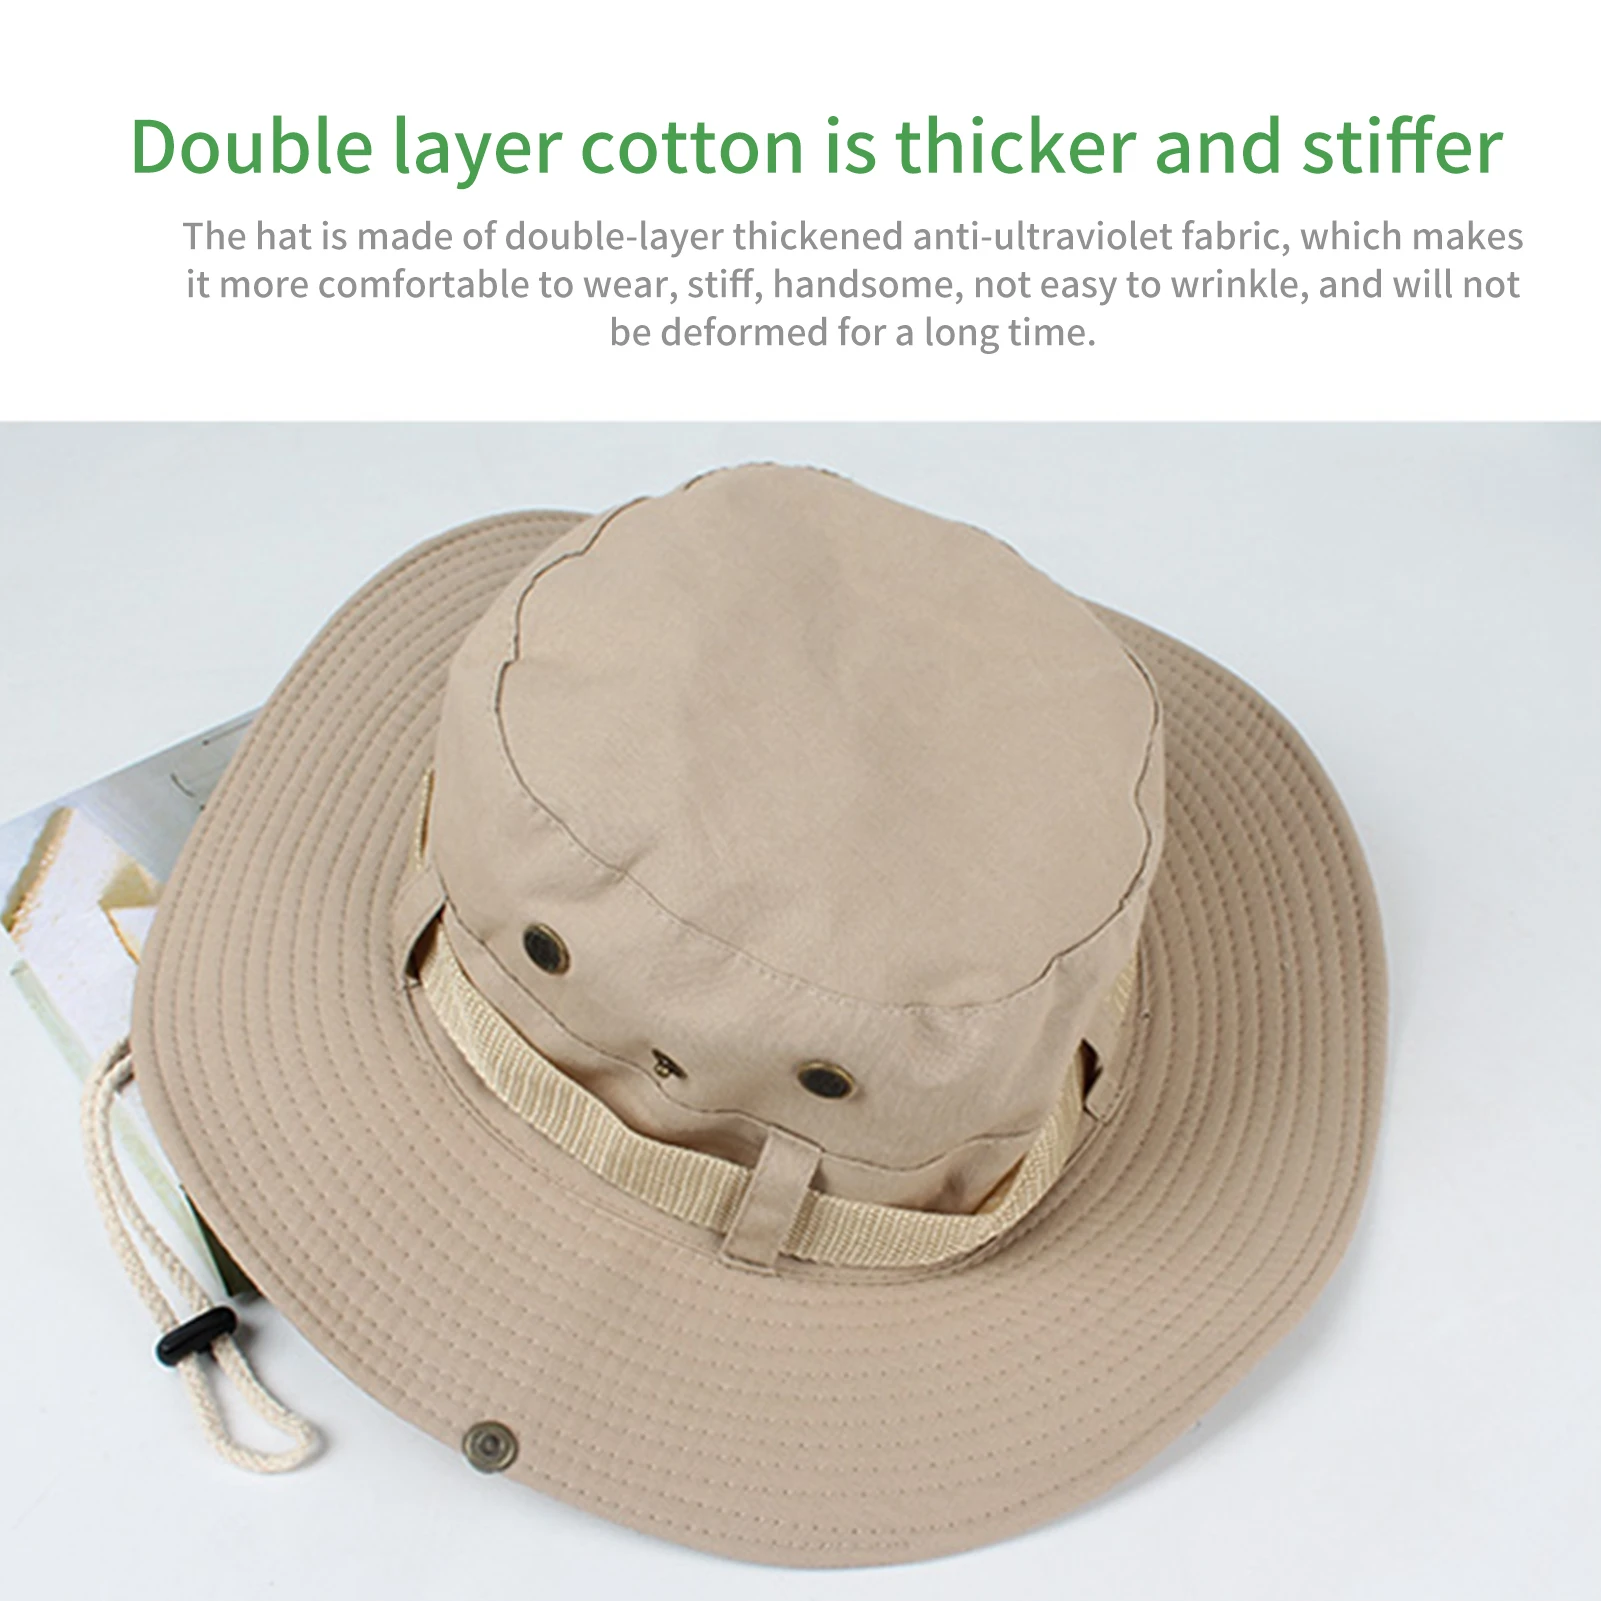 https://ae01.alicdn.com/kf/S49bebe49d2674d0f828b788c7362dd29U/Wide-Brim-Fishing-Hat-Wide-Brim-Fishing-Hat-With-Adjustable-Drawstring-Cooling-Bucket-Hat-Perfect-Accessory.jpg